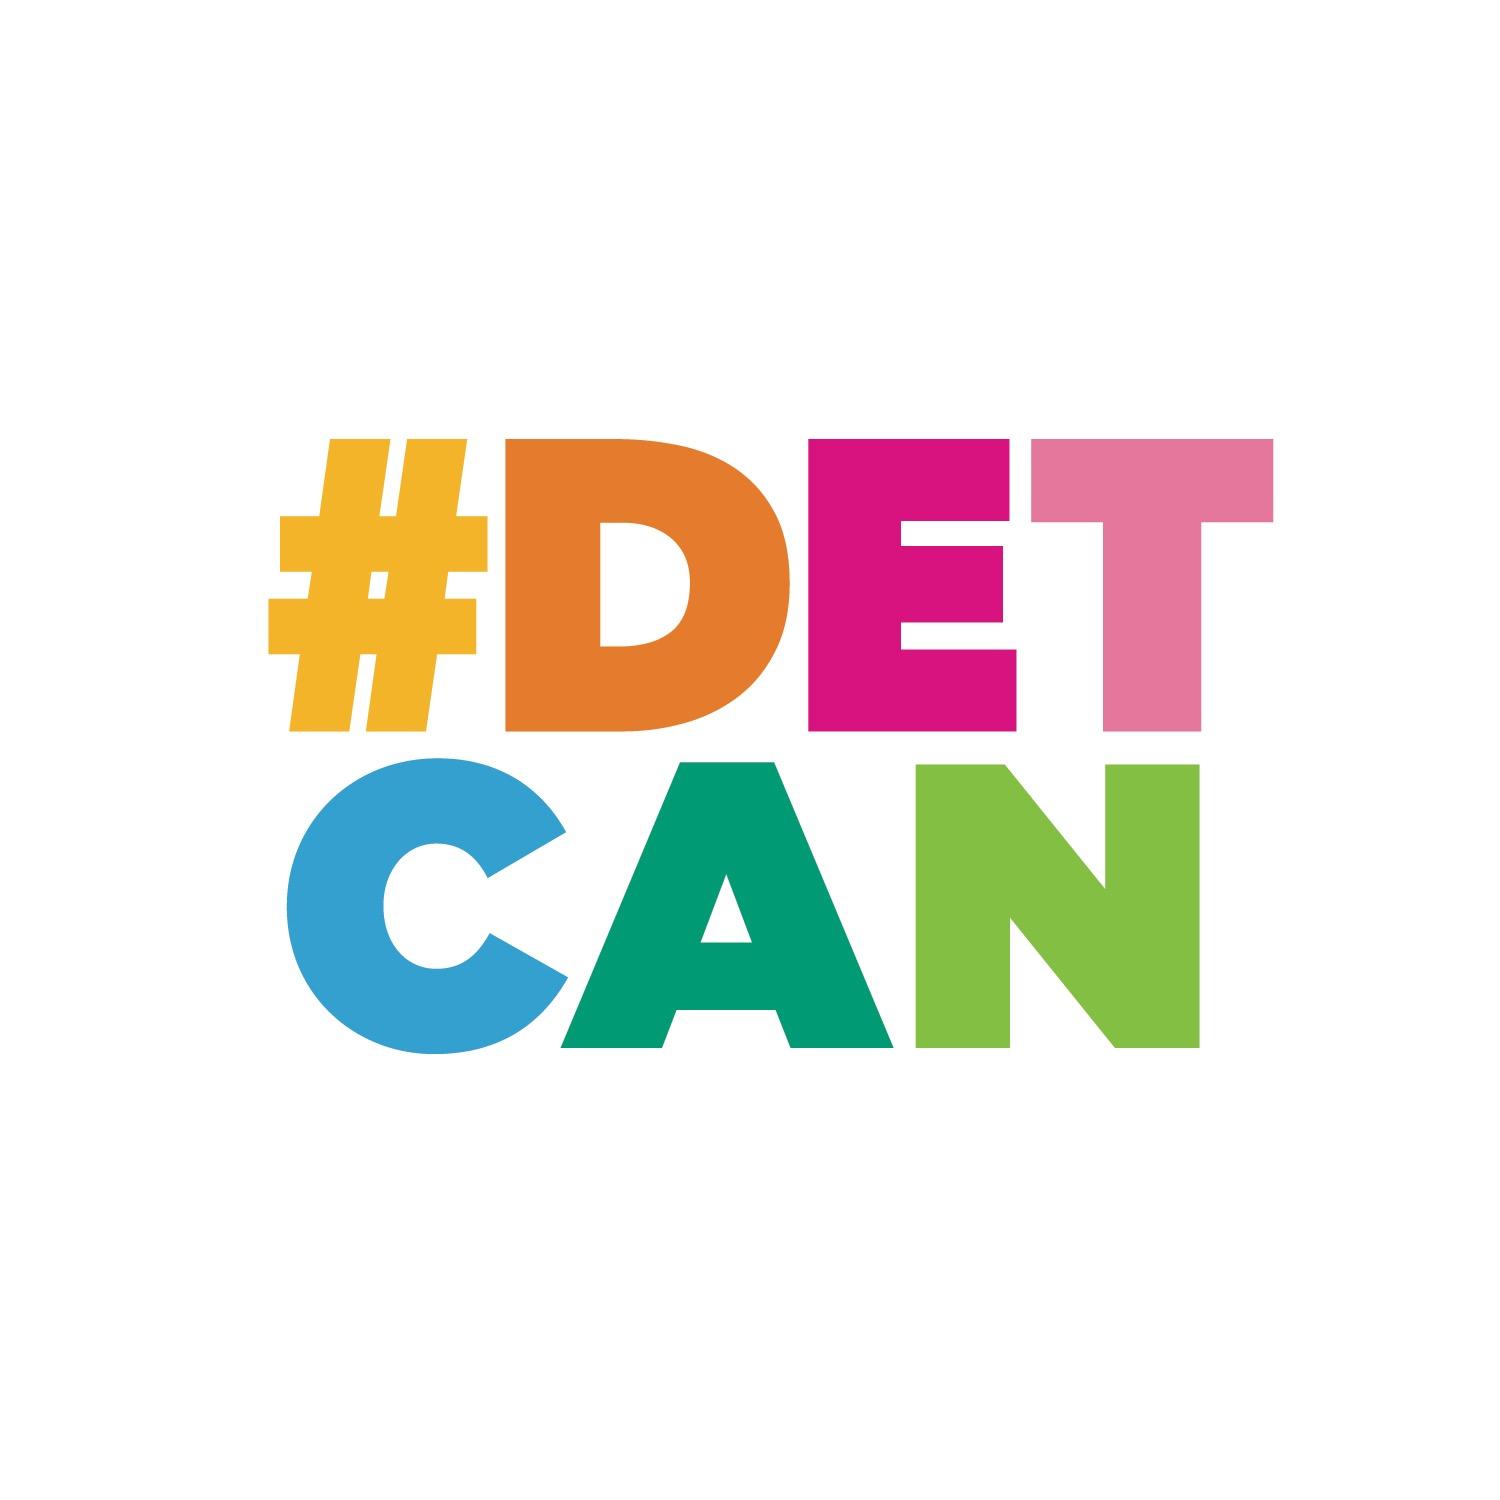 We are creating a social media campaign to promote positivity about Detroit and the community. Through the hashtag #DetroitCan we will offer a new 
perspective